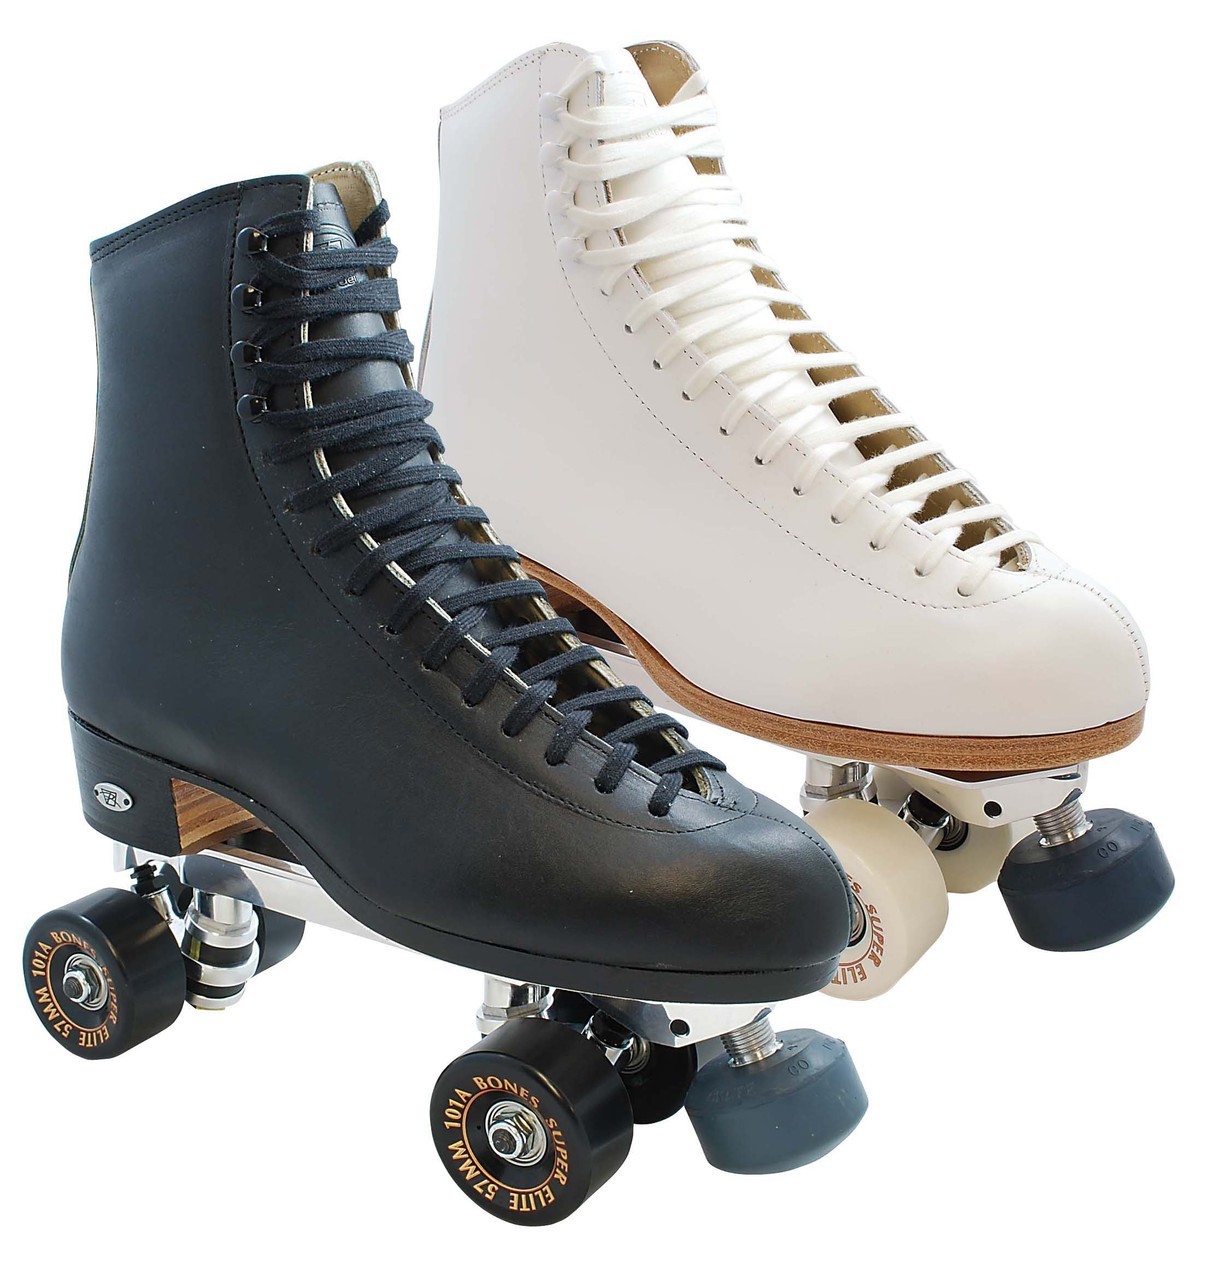 Download What "style" of roller skates do you really want? - Skate Talk